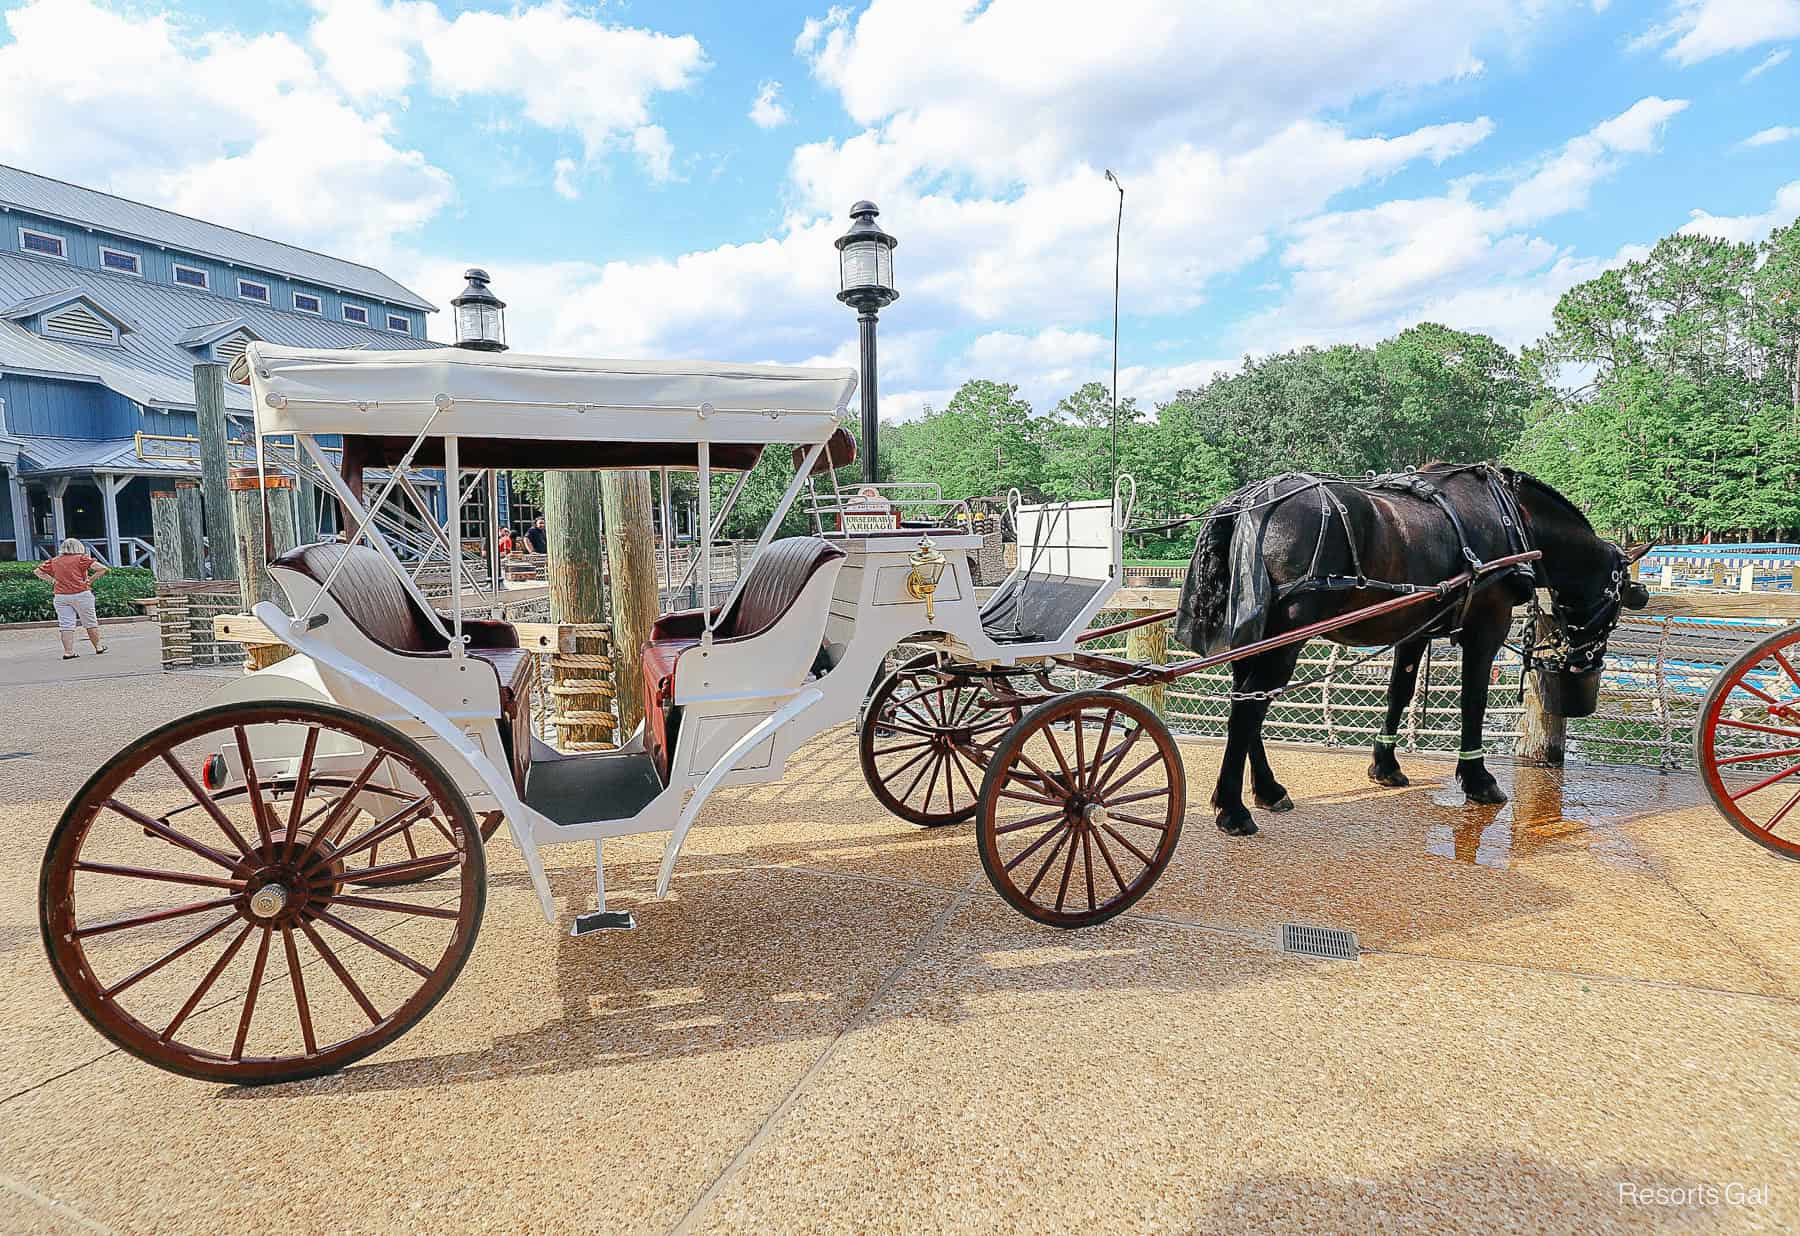 the carriage requires that guests step up inside the vehicle 